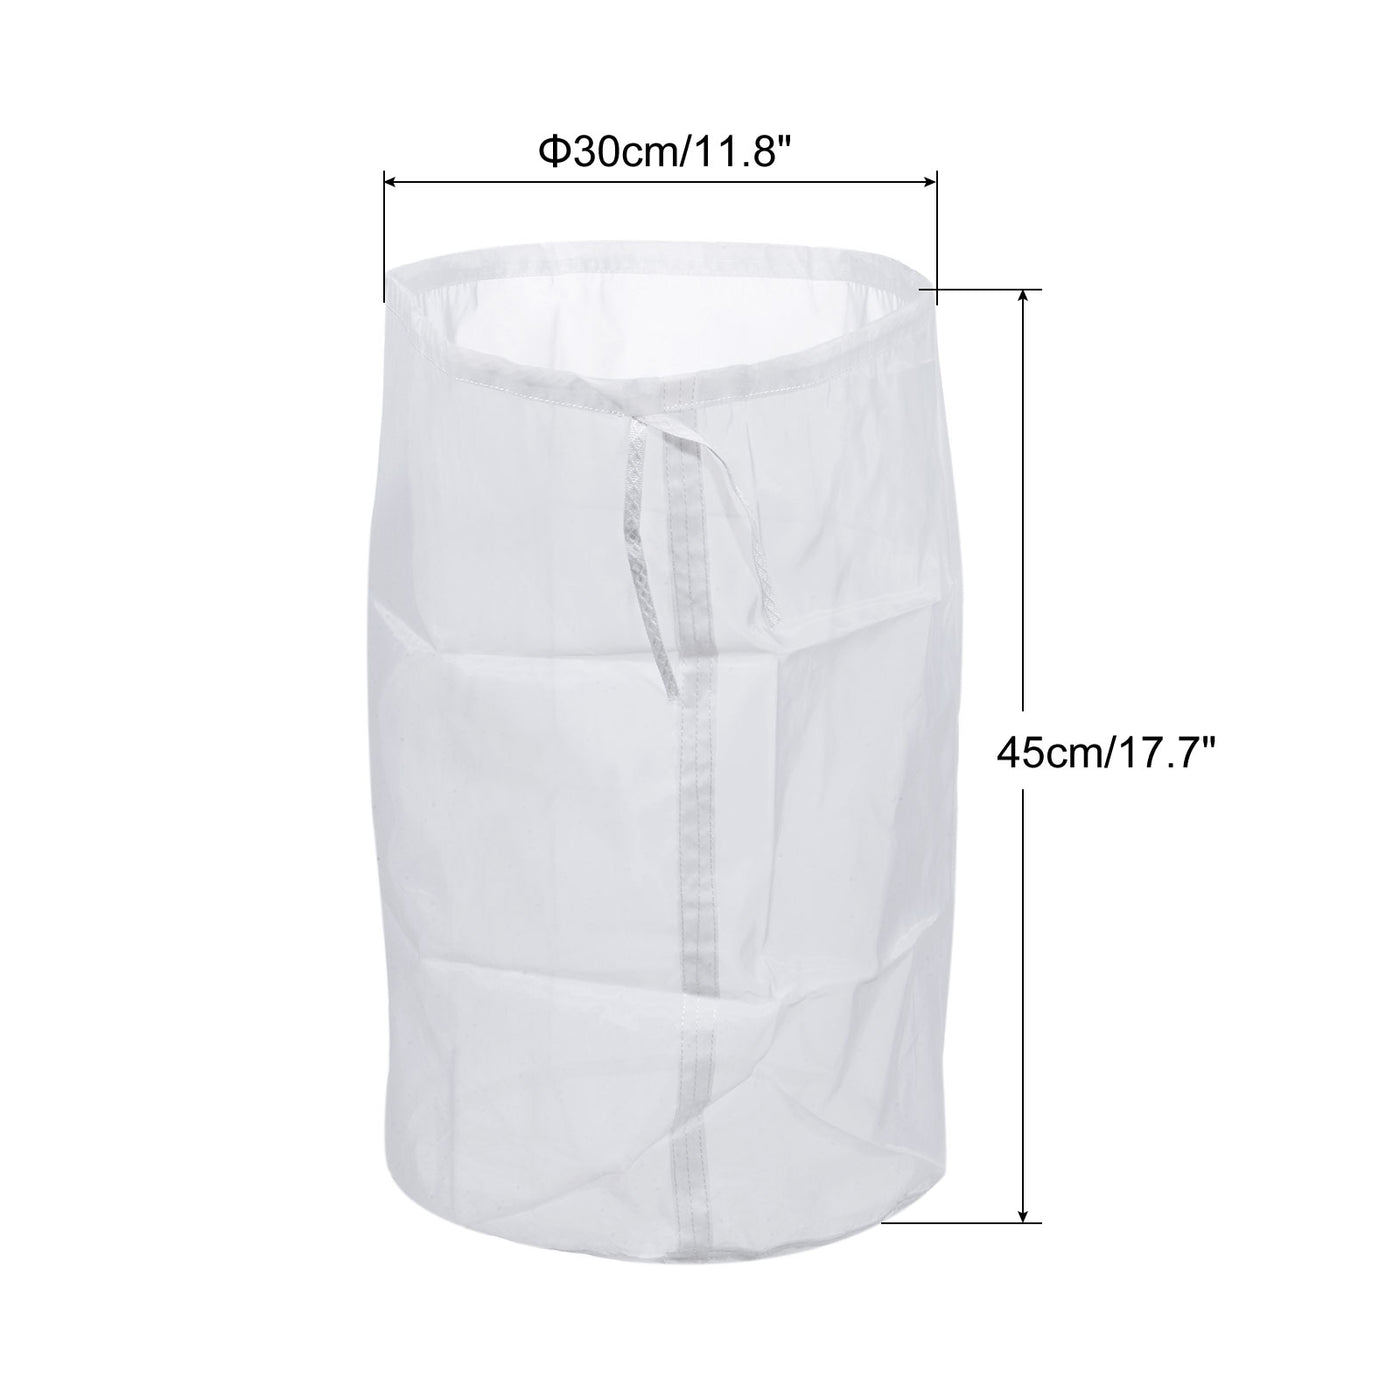 uxcell Uxcell 100 Mesh Paint Filter Bag 11.8" Dia Nylon Strainer with Drawstring 2Pcs